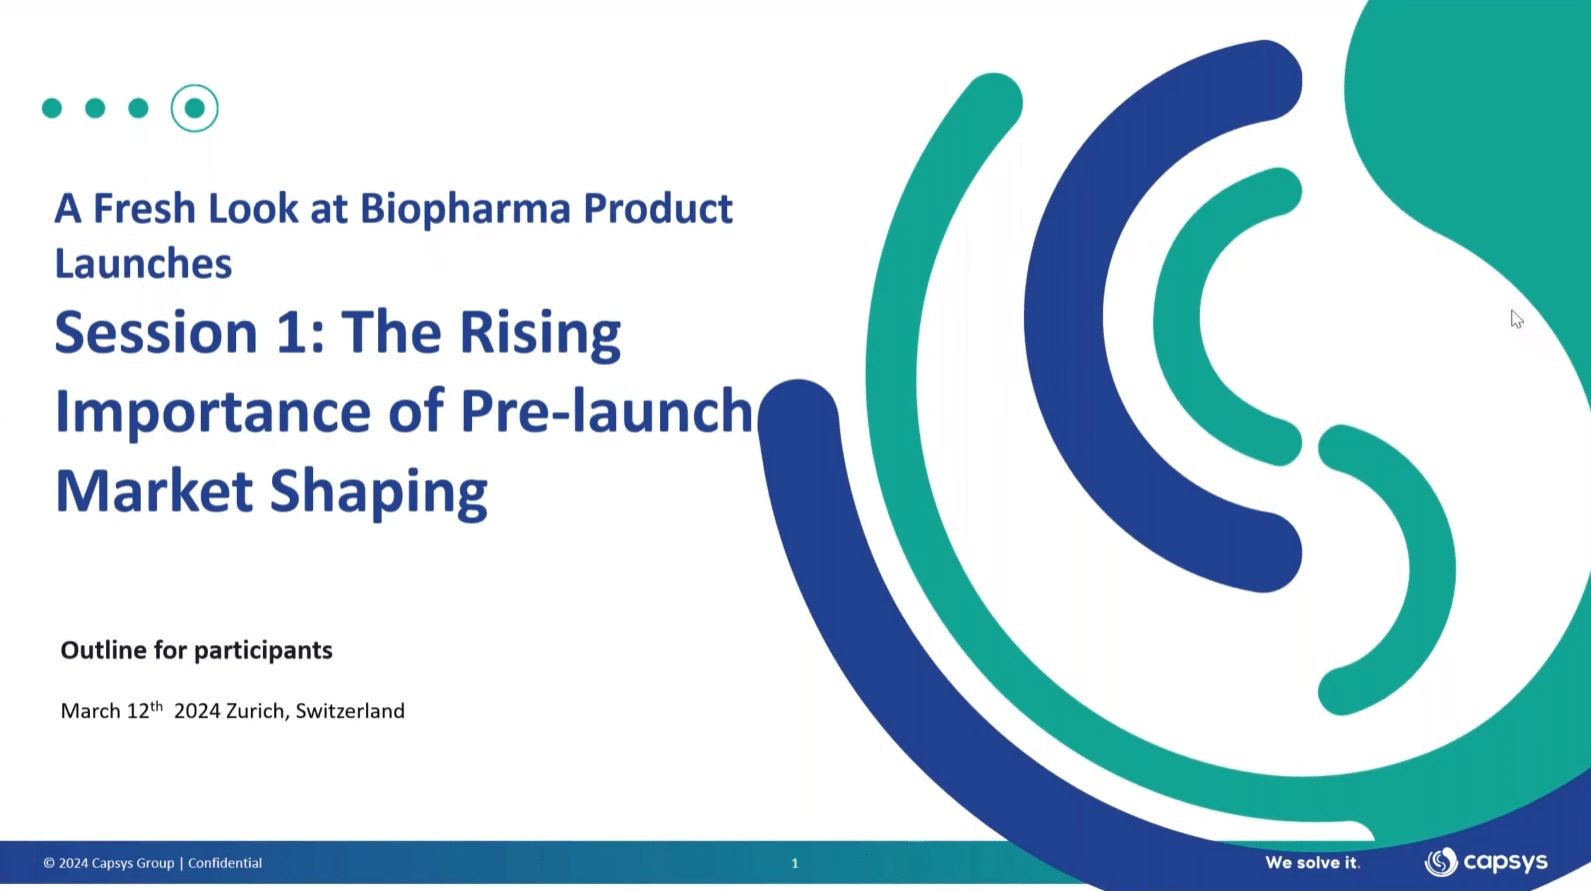 The rising importance of pre-launch market shaping